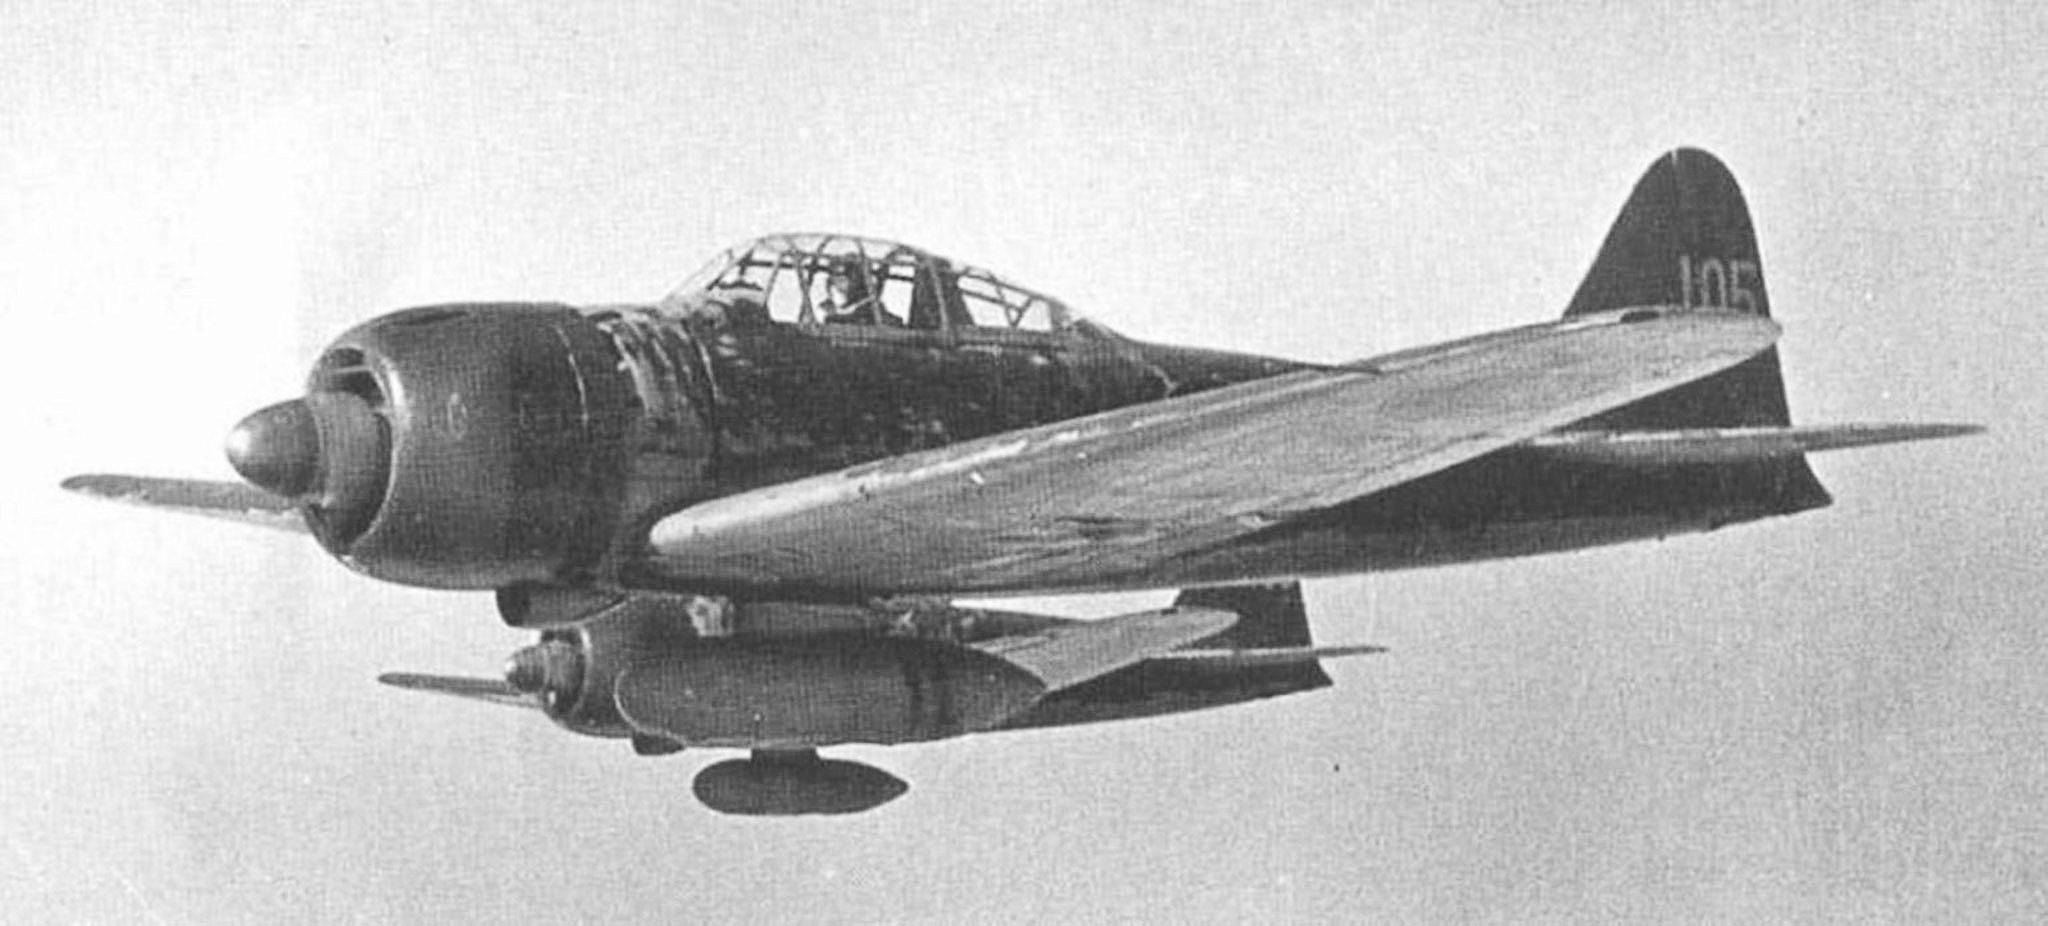 Japanese pilot Nishizawa flying his A6M3a Model 22 Zero fighter in the Solomon Islands area, 7 May 1943